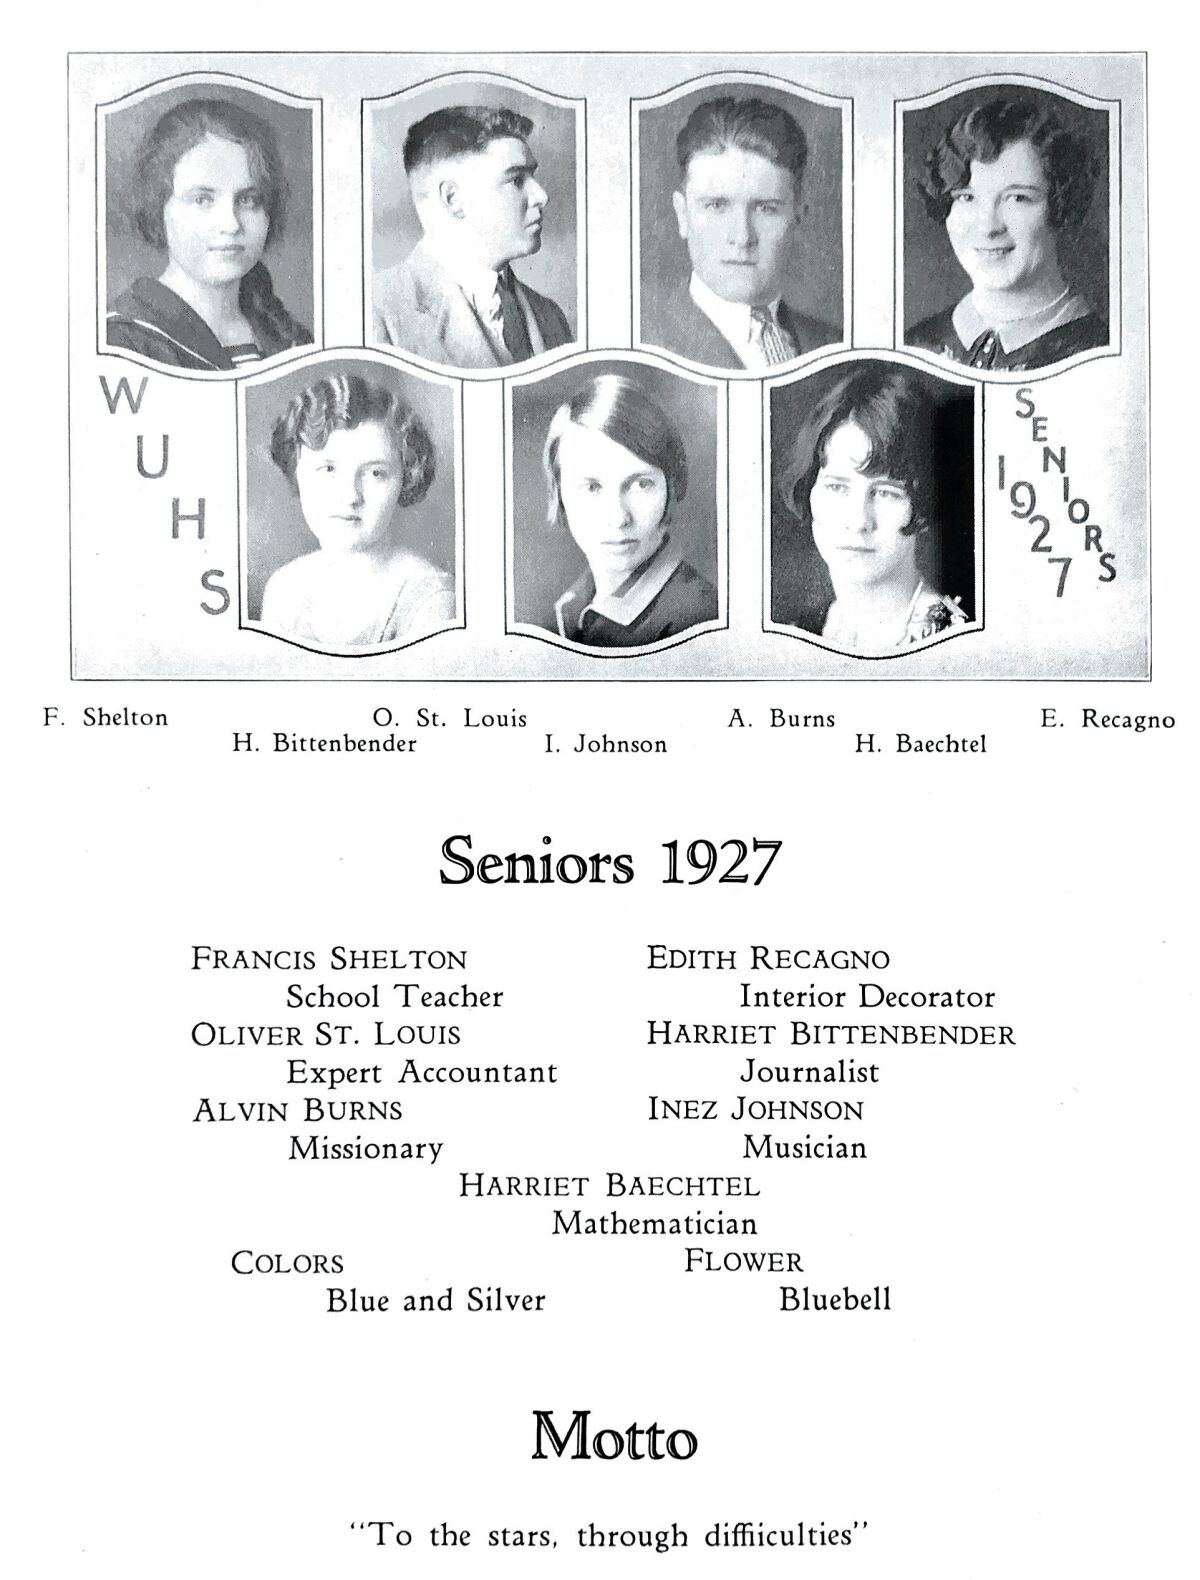 A high school yearbook page with photos and other information